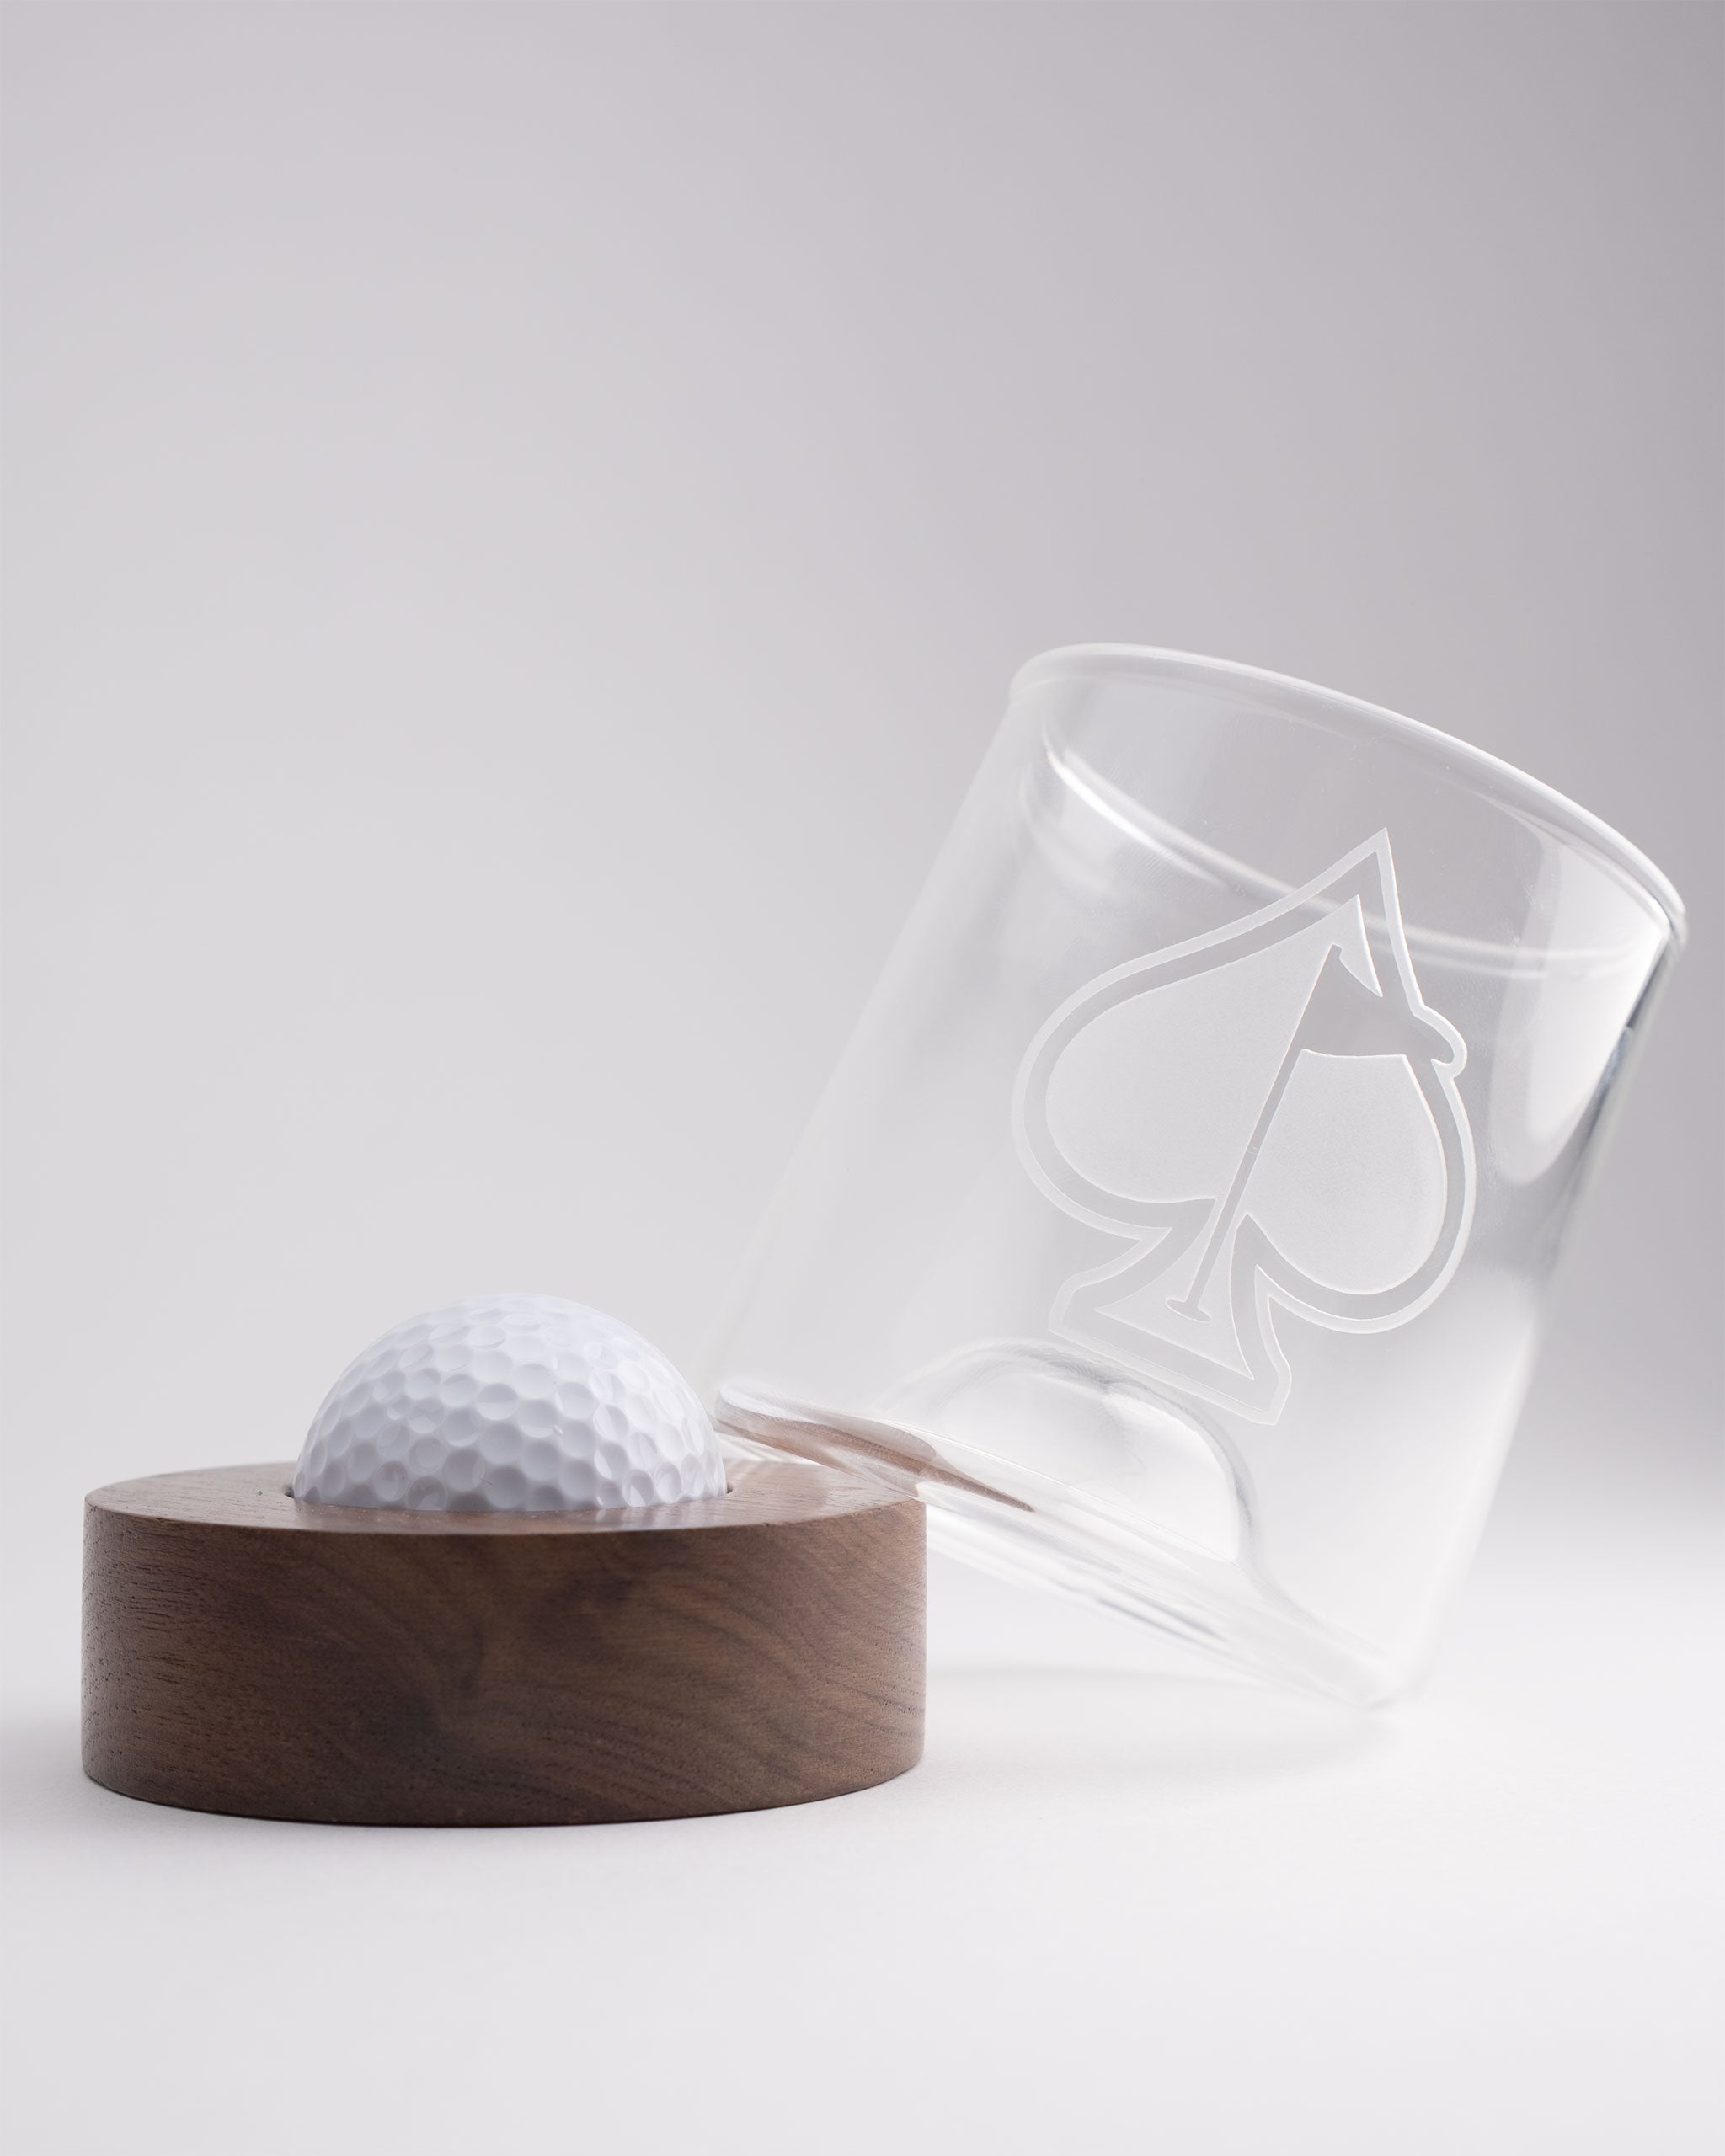 Pins & Aces Golf Ball Whiskey Glasses (Set of 2)